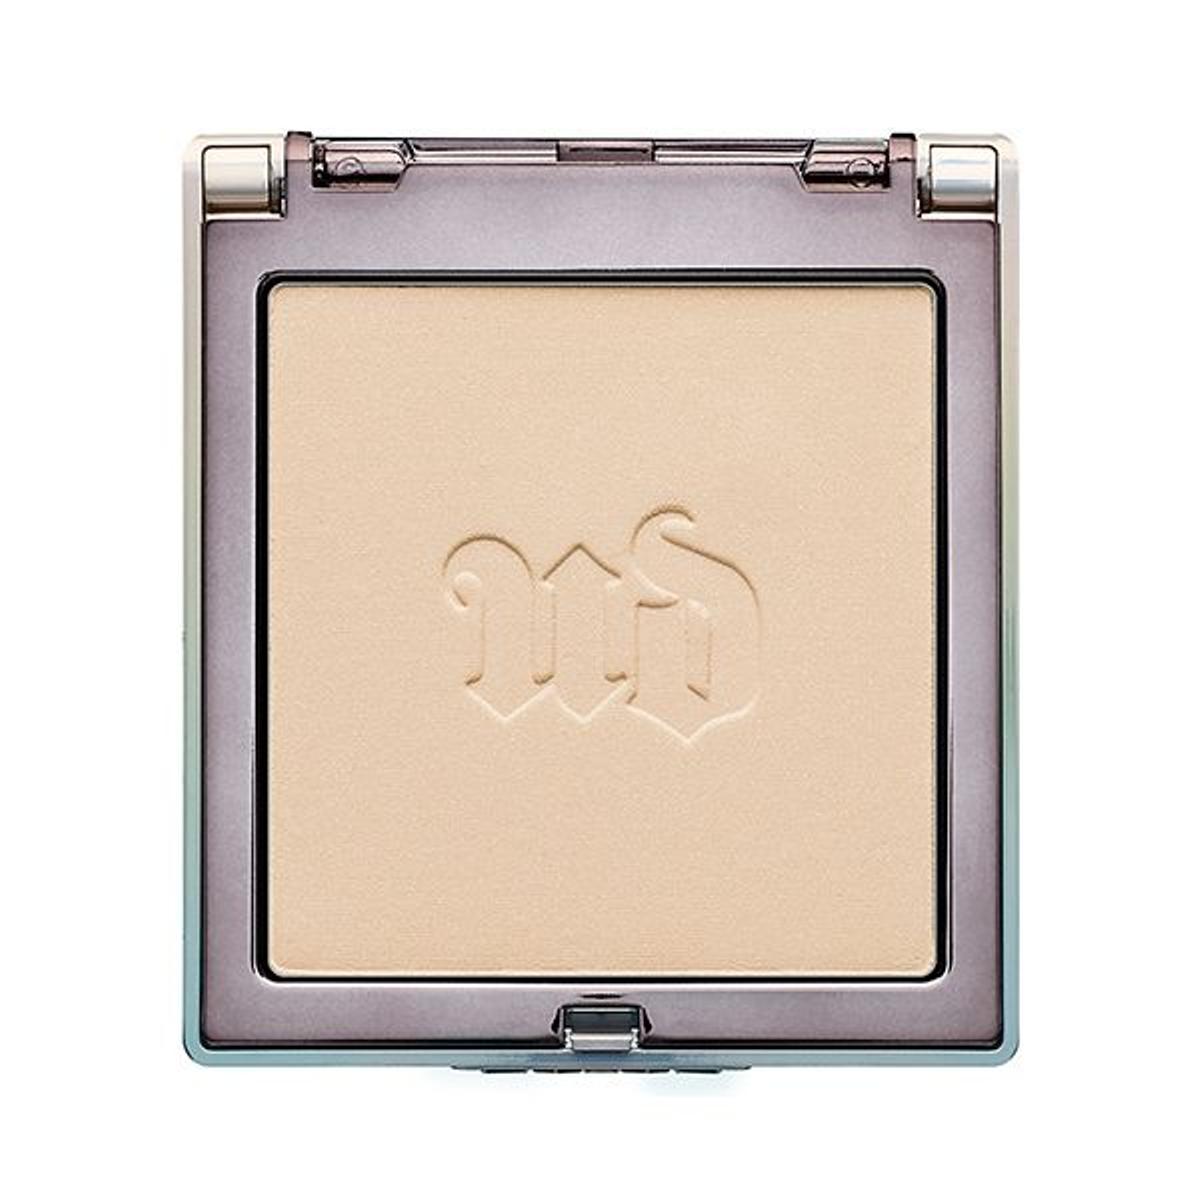 Afterglow 8-Hour Powder Highlighter, Urban Decay